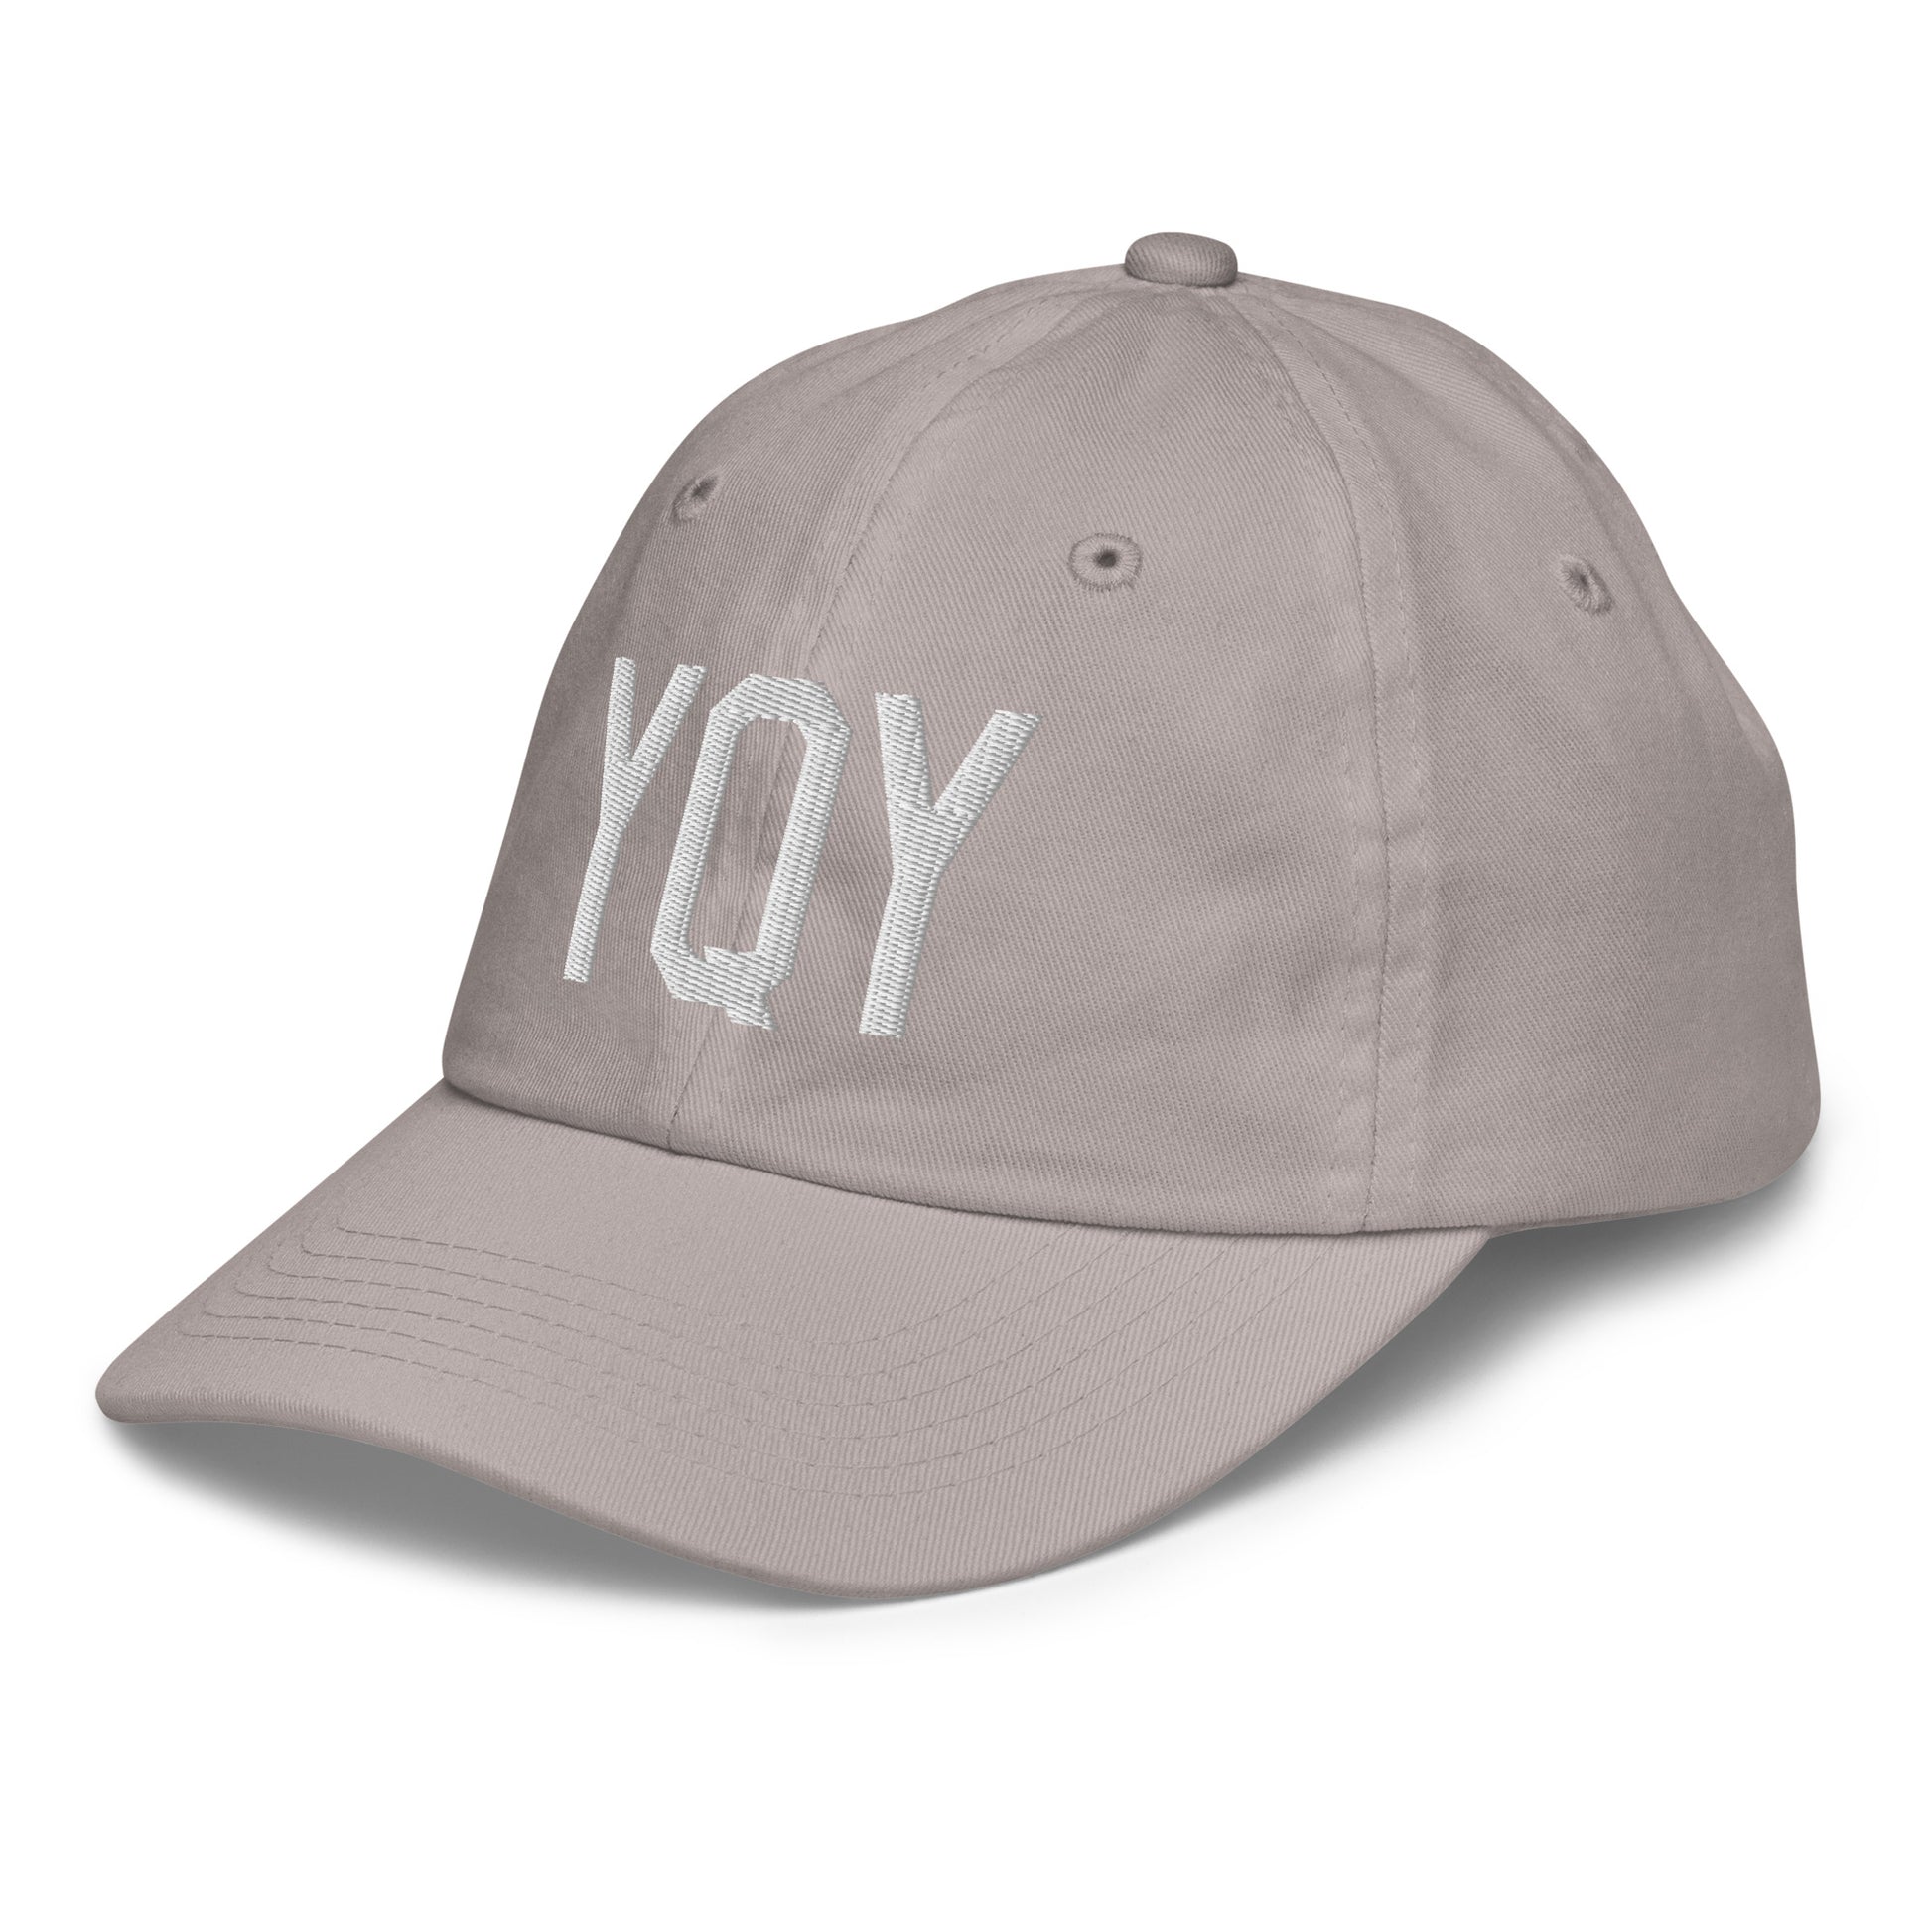 Airport Code Kid's Baseball Cap - White • YQY Sydney • YHM Designs - Image 27